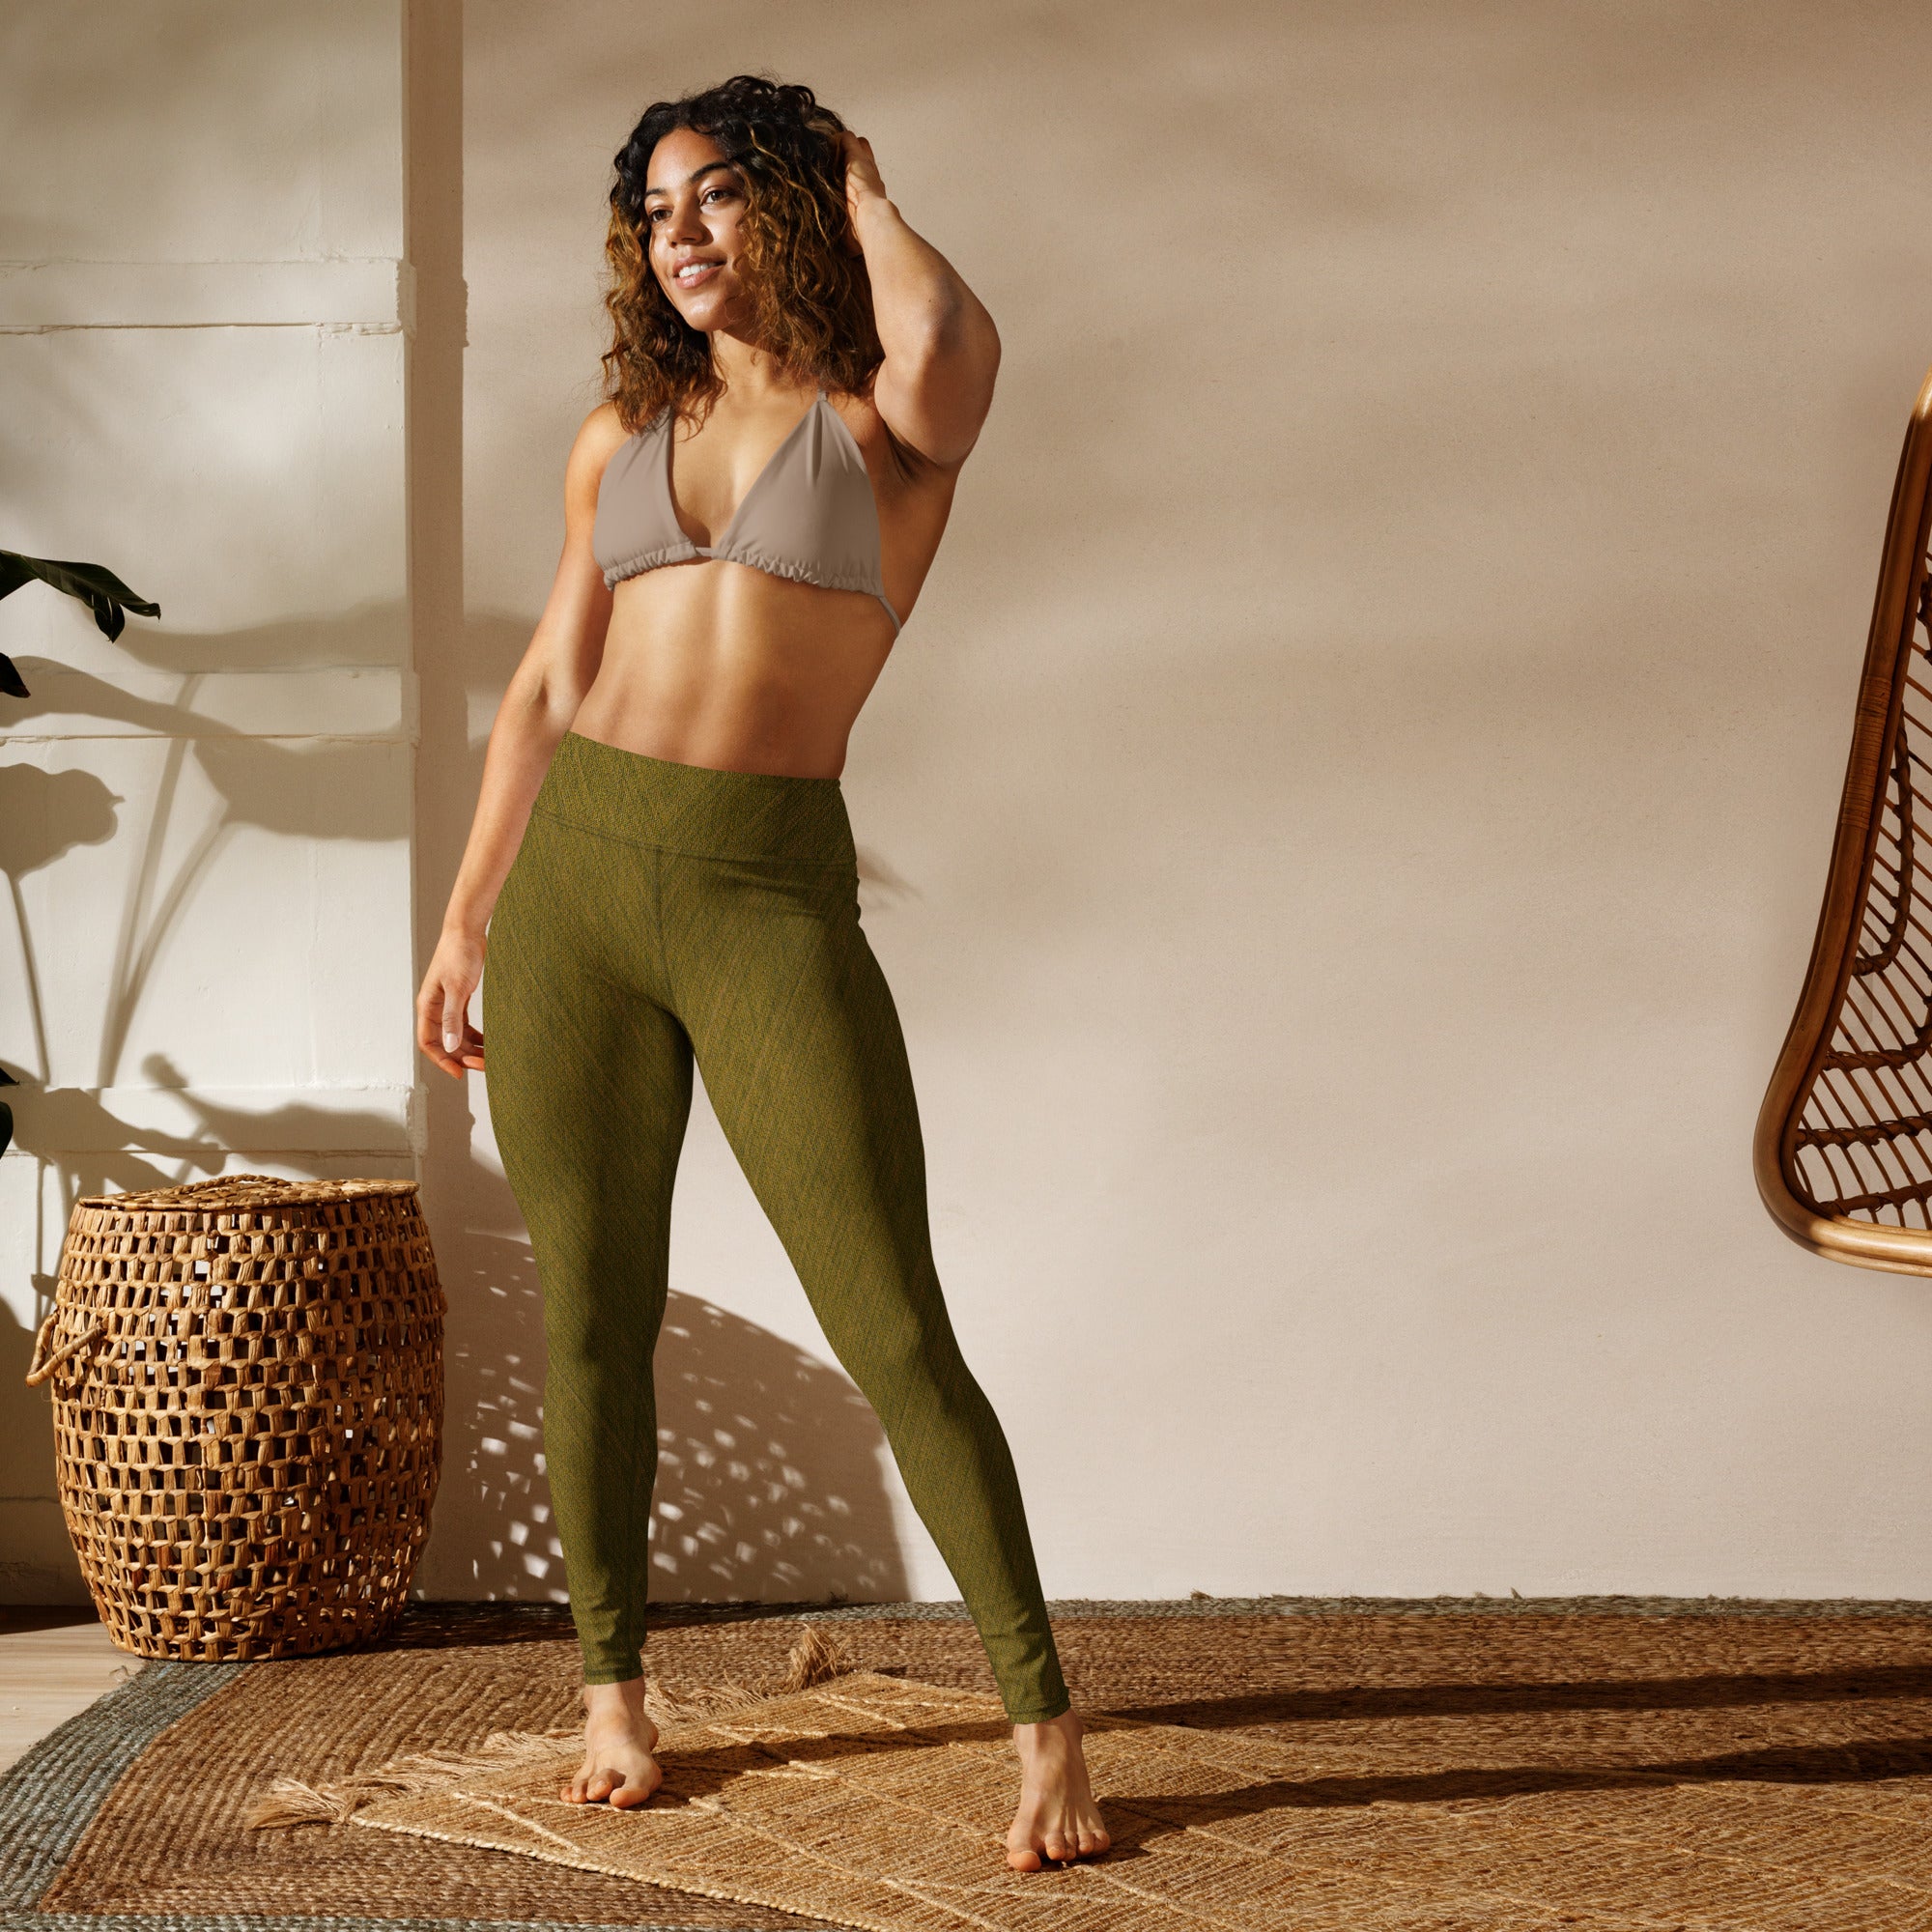 Elevate Your Yoga Wear with Skinny Jeans Sensation Leggings - Style Meets Function